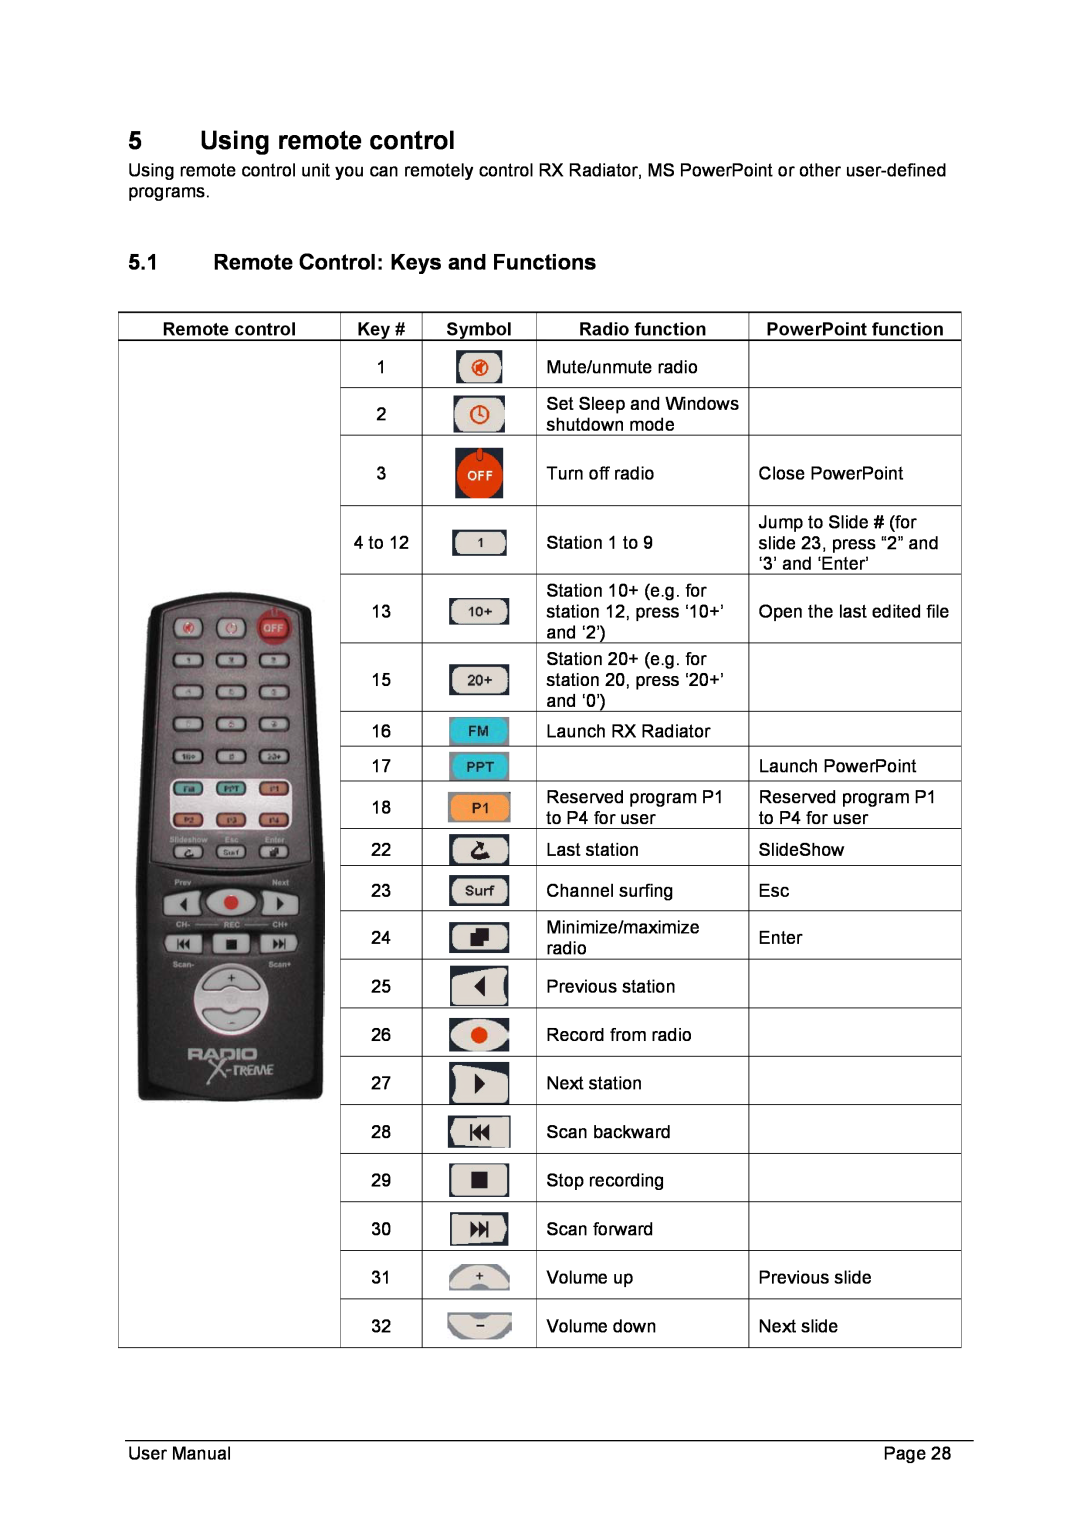 Philips FMU-100 user manual Using remote control, Remote control, Key #, Symbol, Radio function, PowerPoint function 